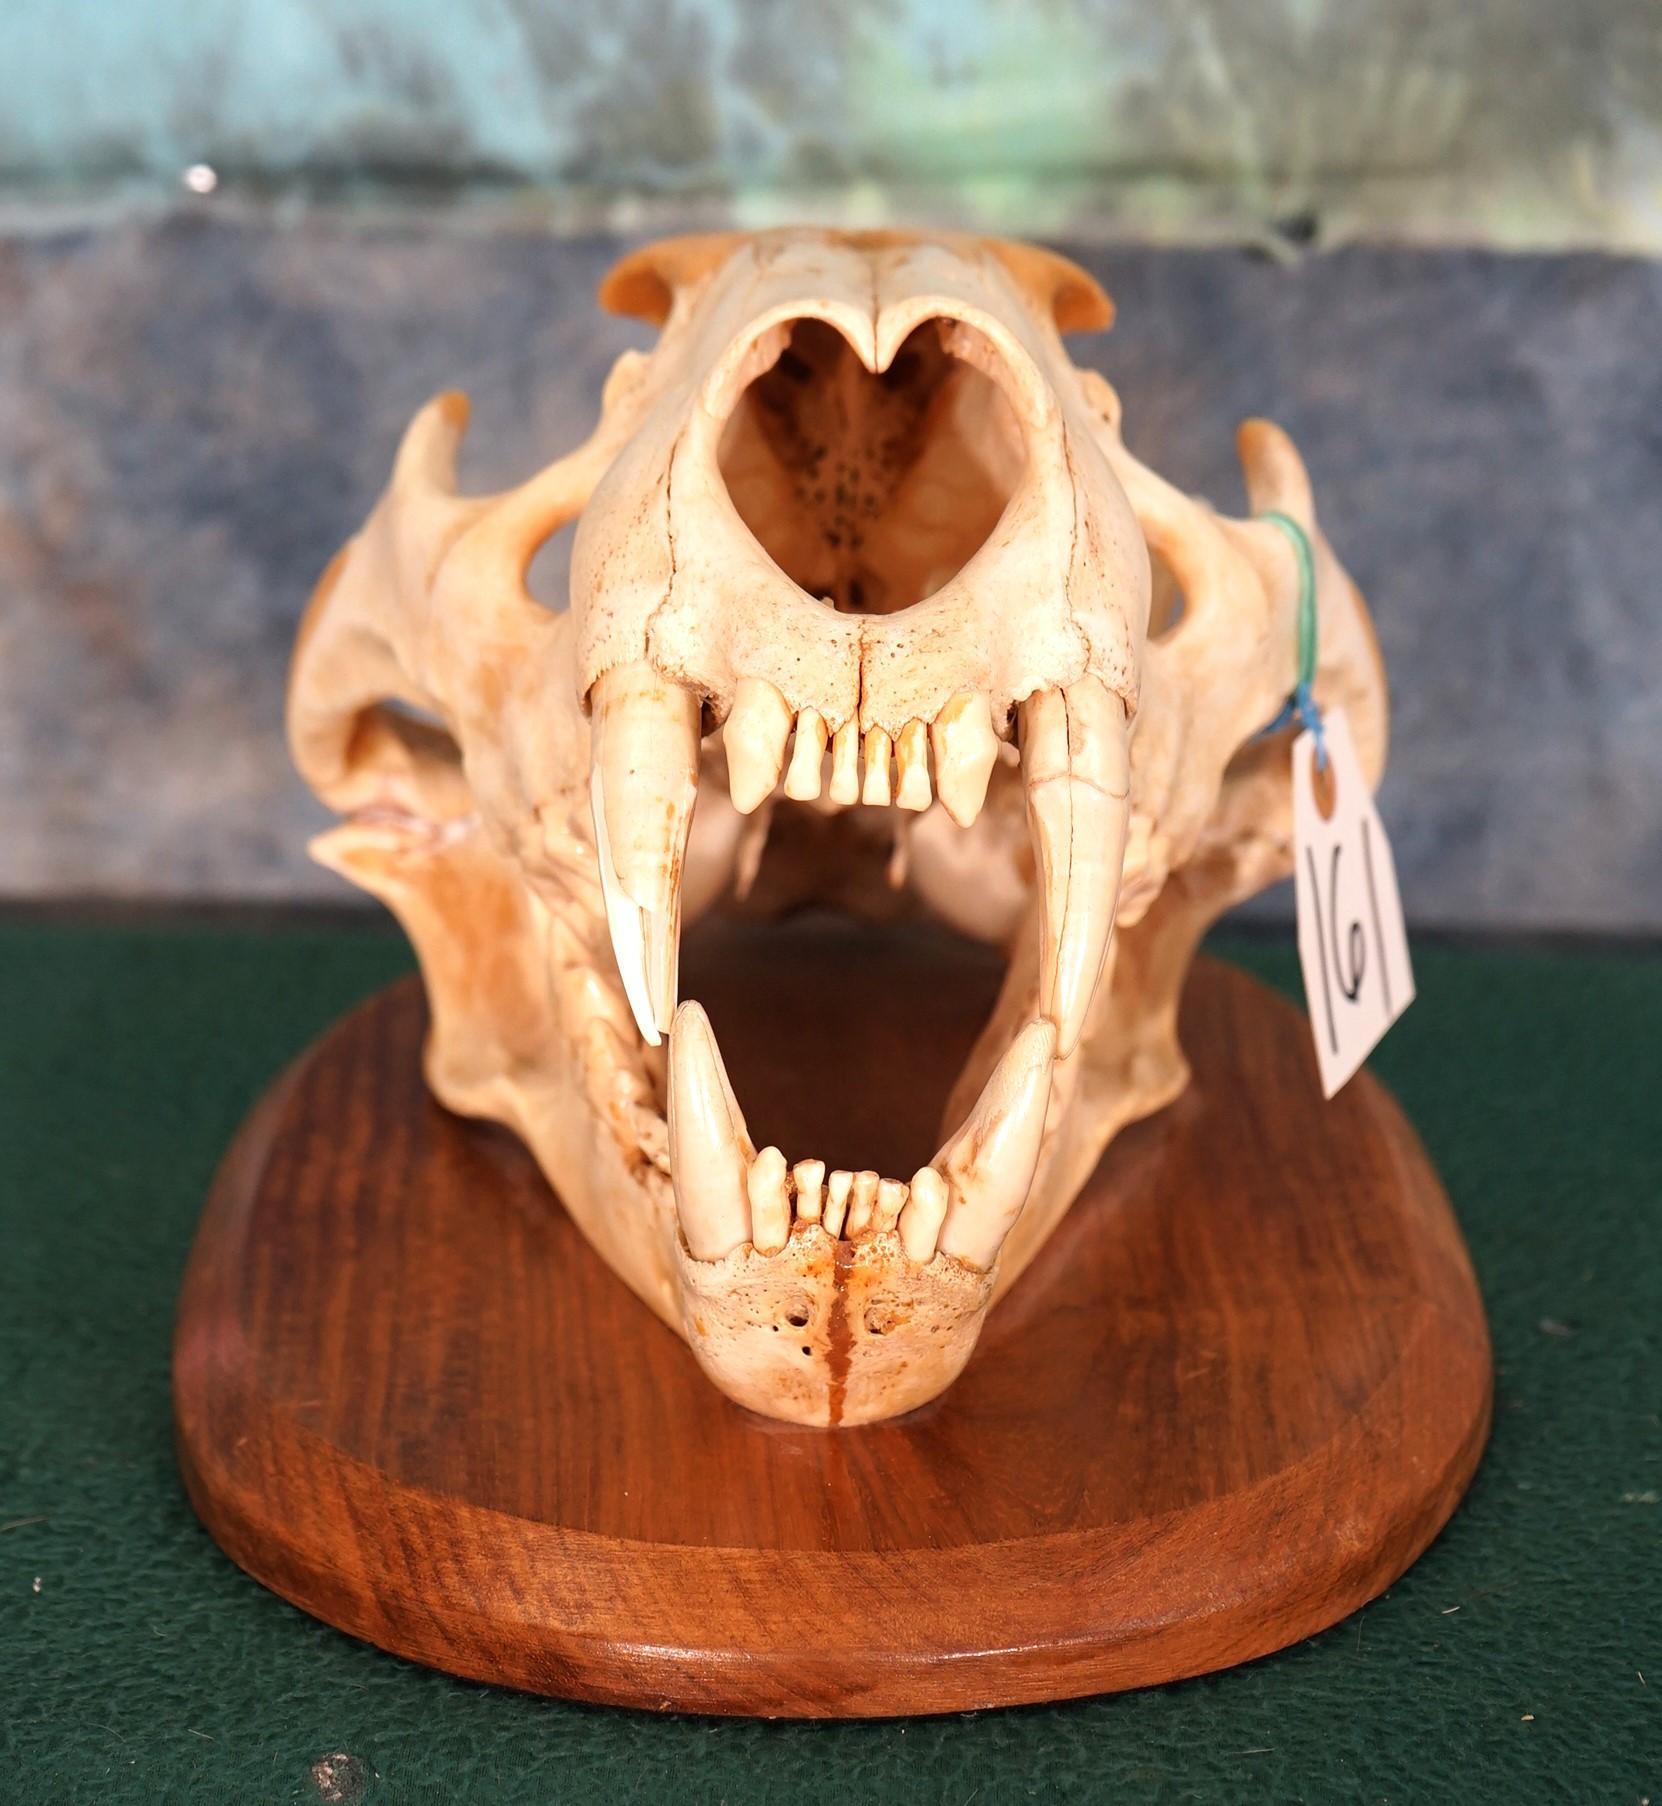 African Male Lion Skull on Plaque Taxidermy Mount **TEXAS RESIDENTS ONLY!**